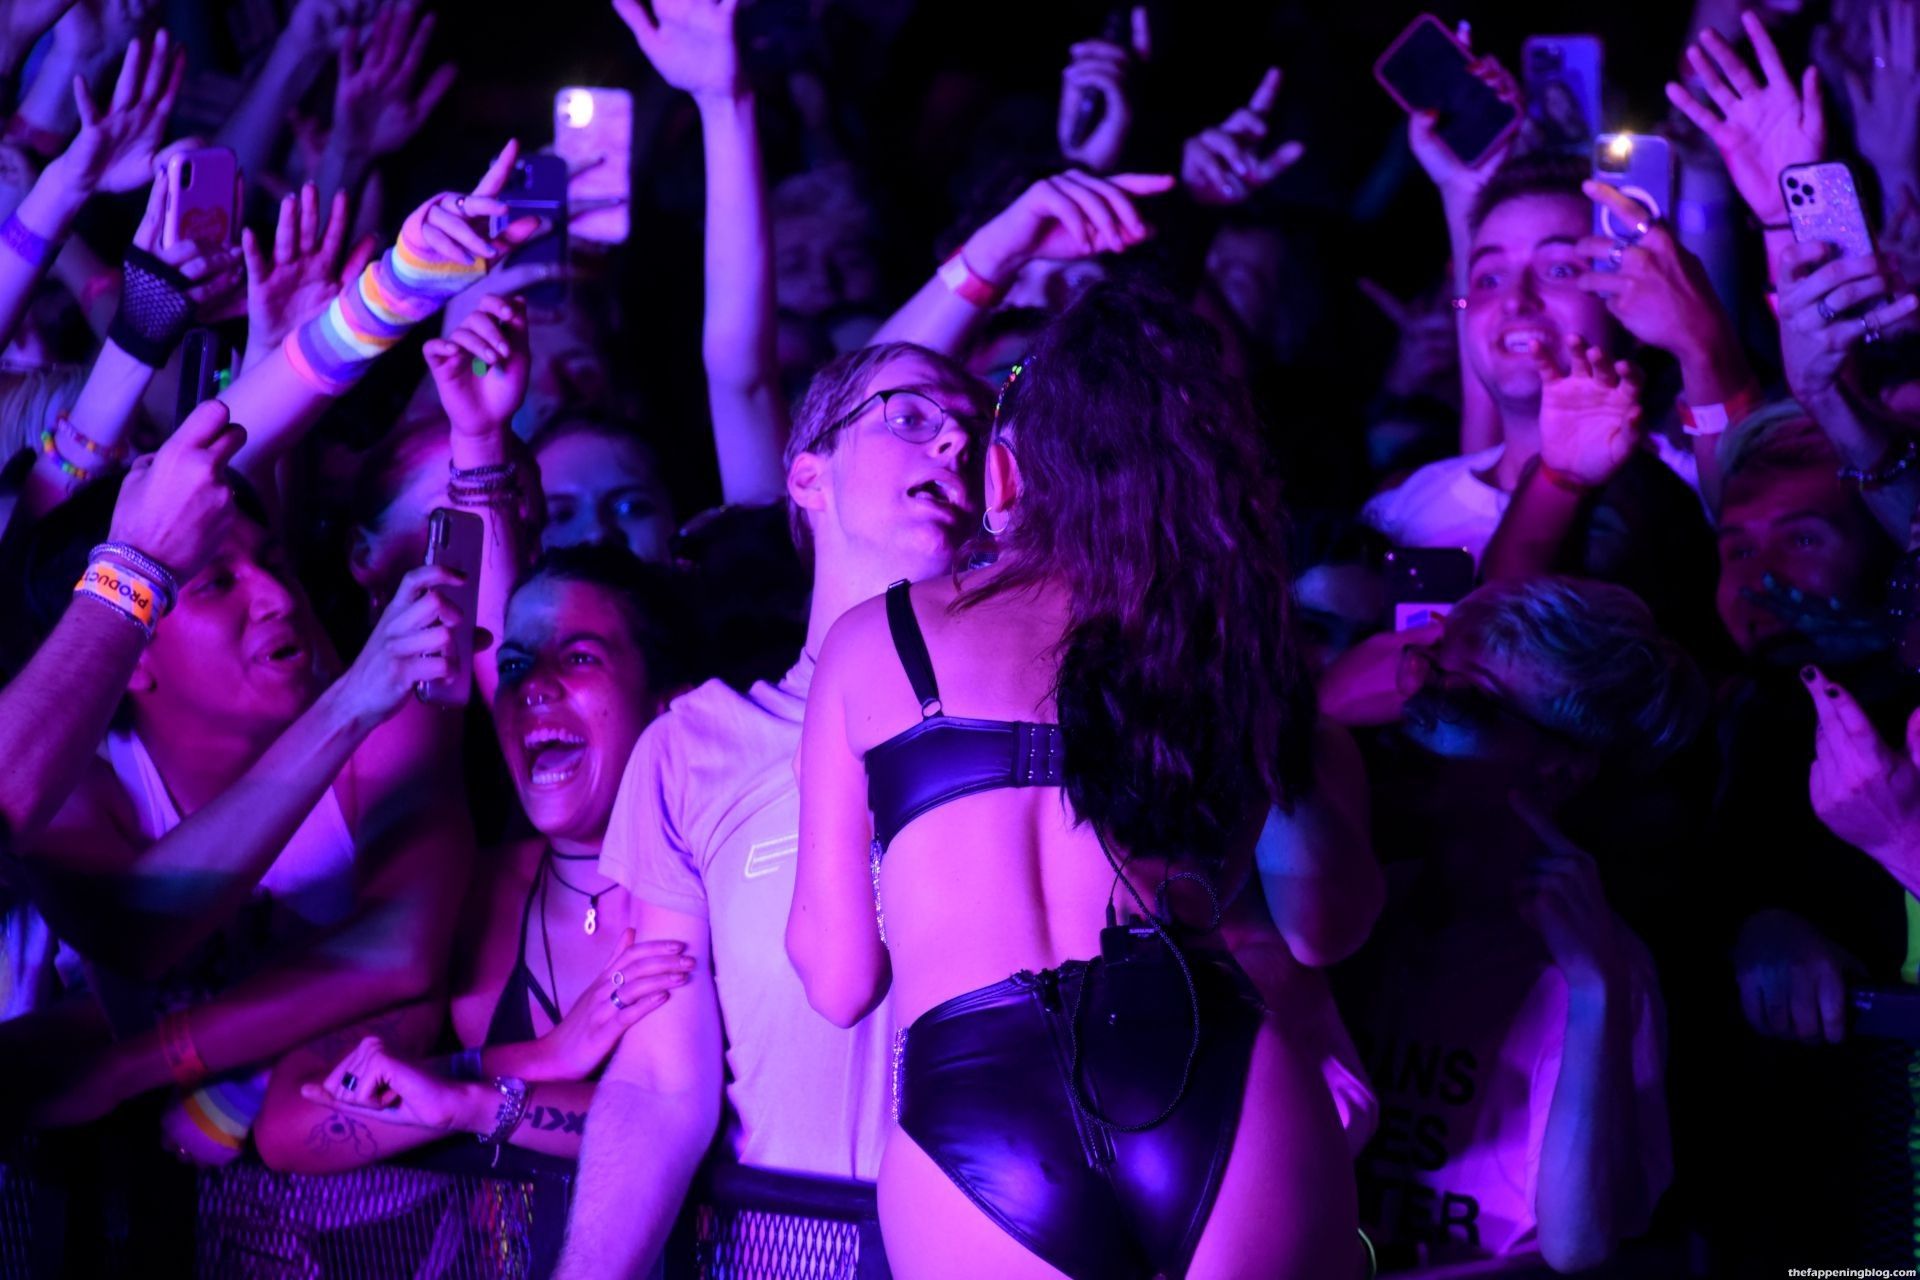 Charli-XCX-Sexy-on-Stage-19-thefappeningblog.com_.jpg